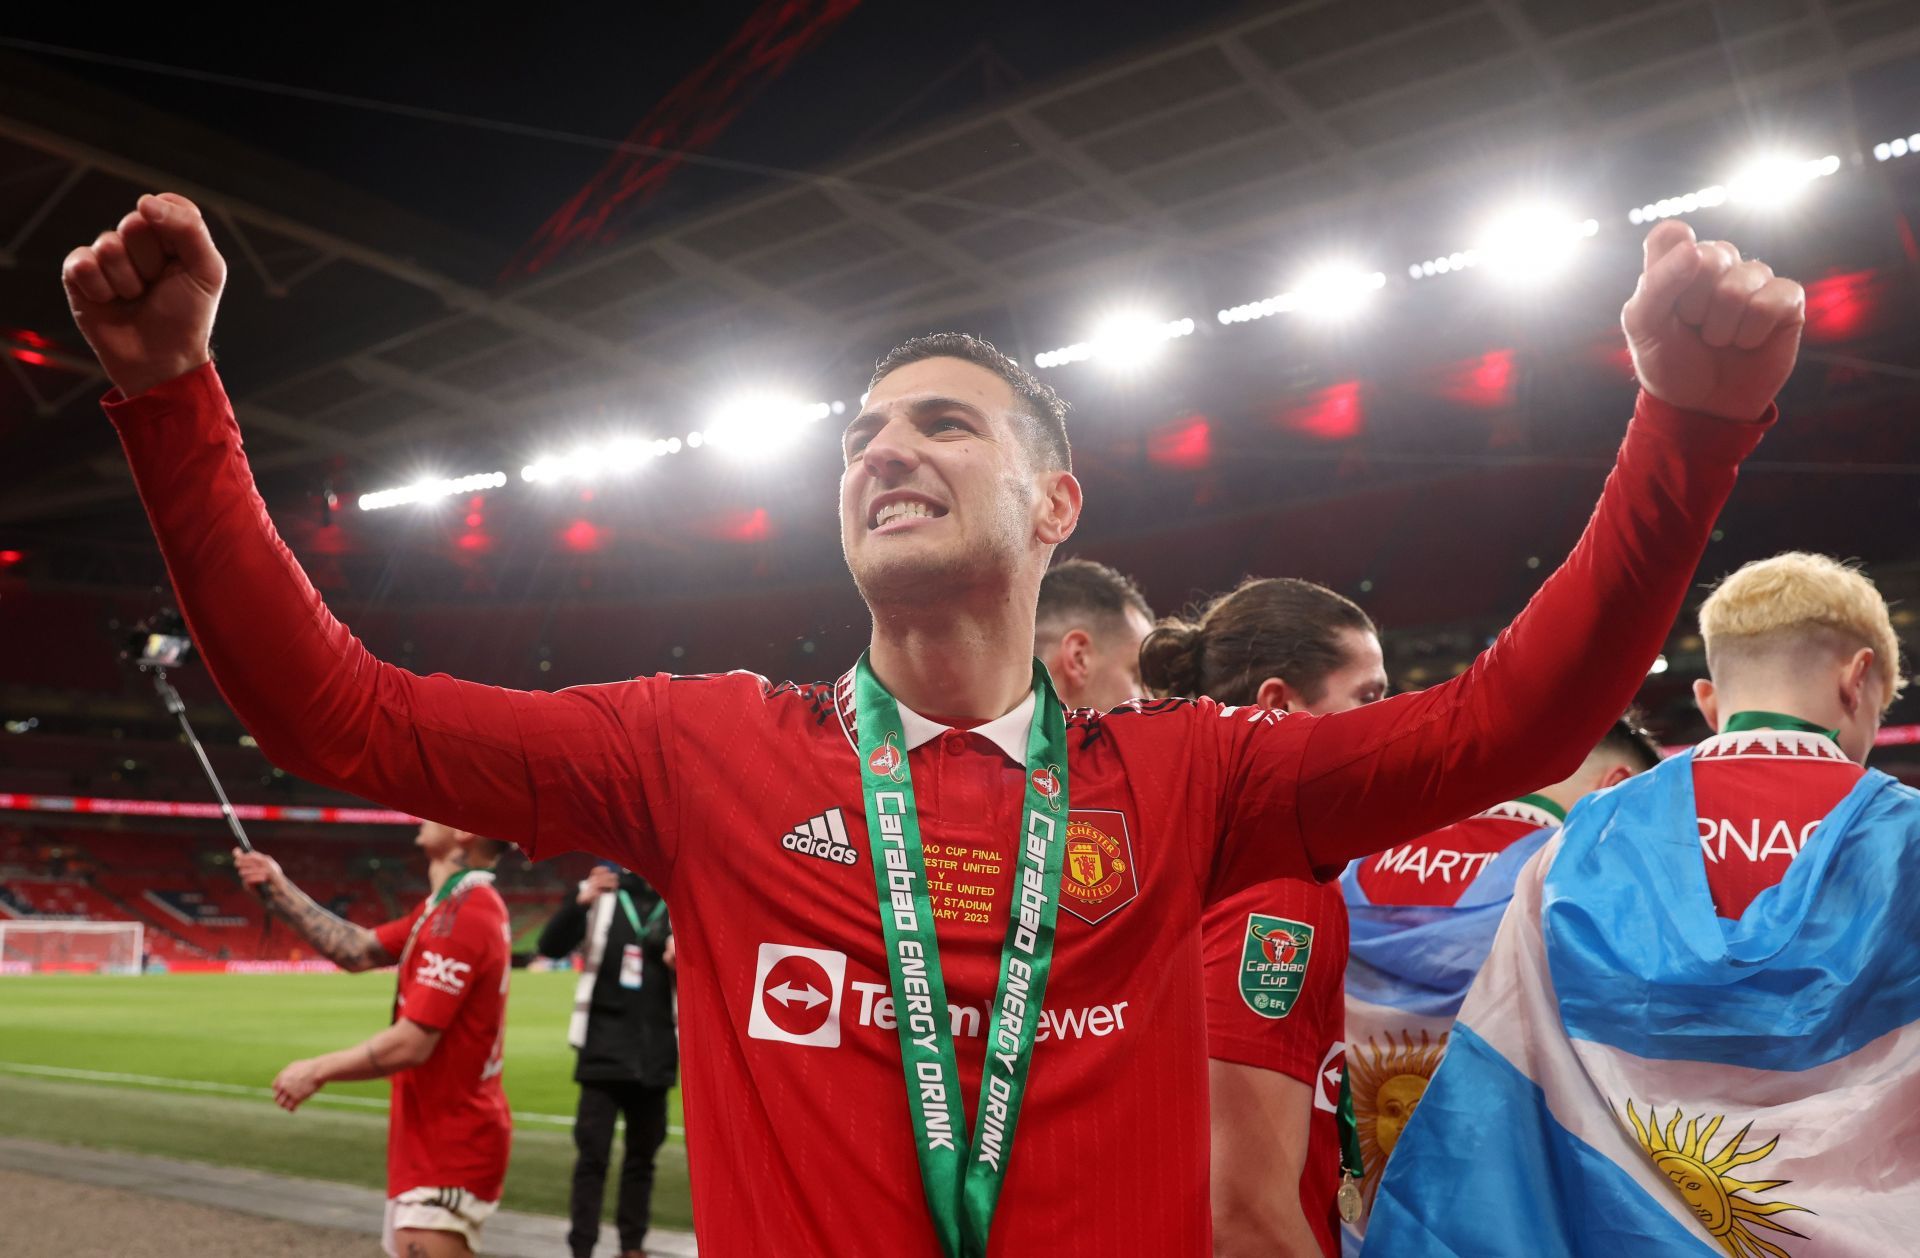 The Red Devils want Dalot to sign a long-term deal.